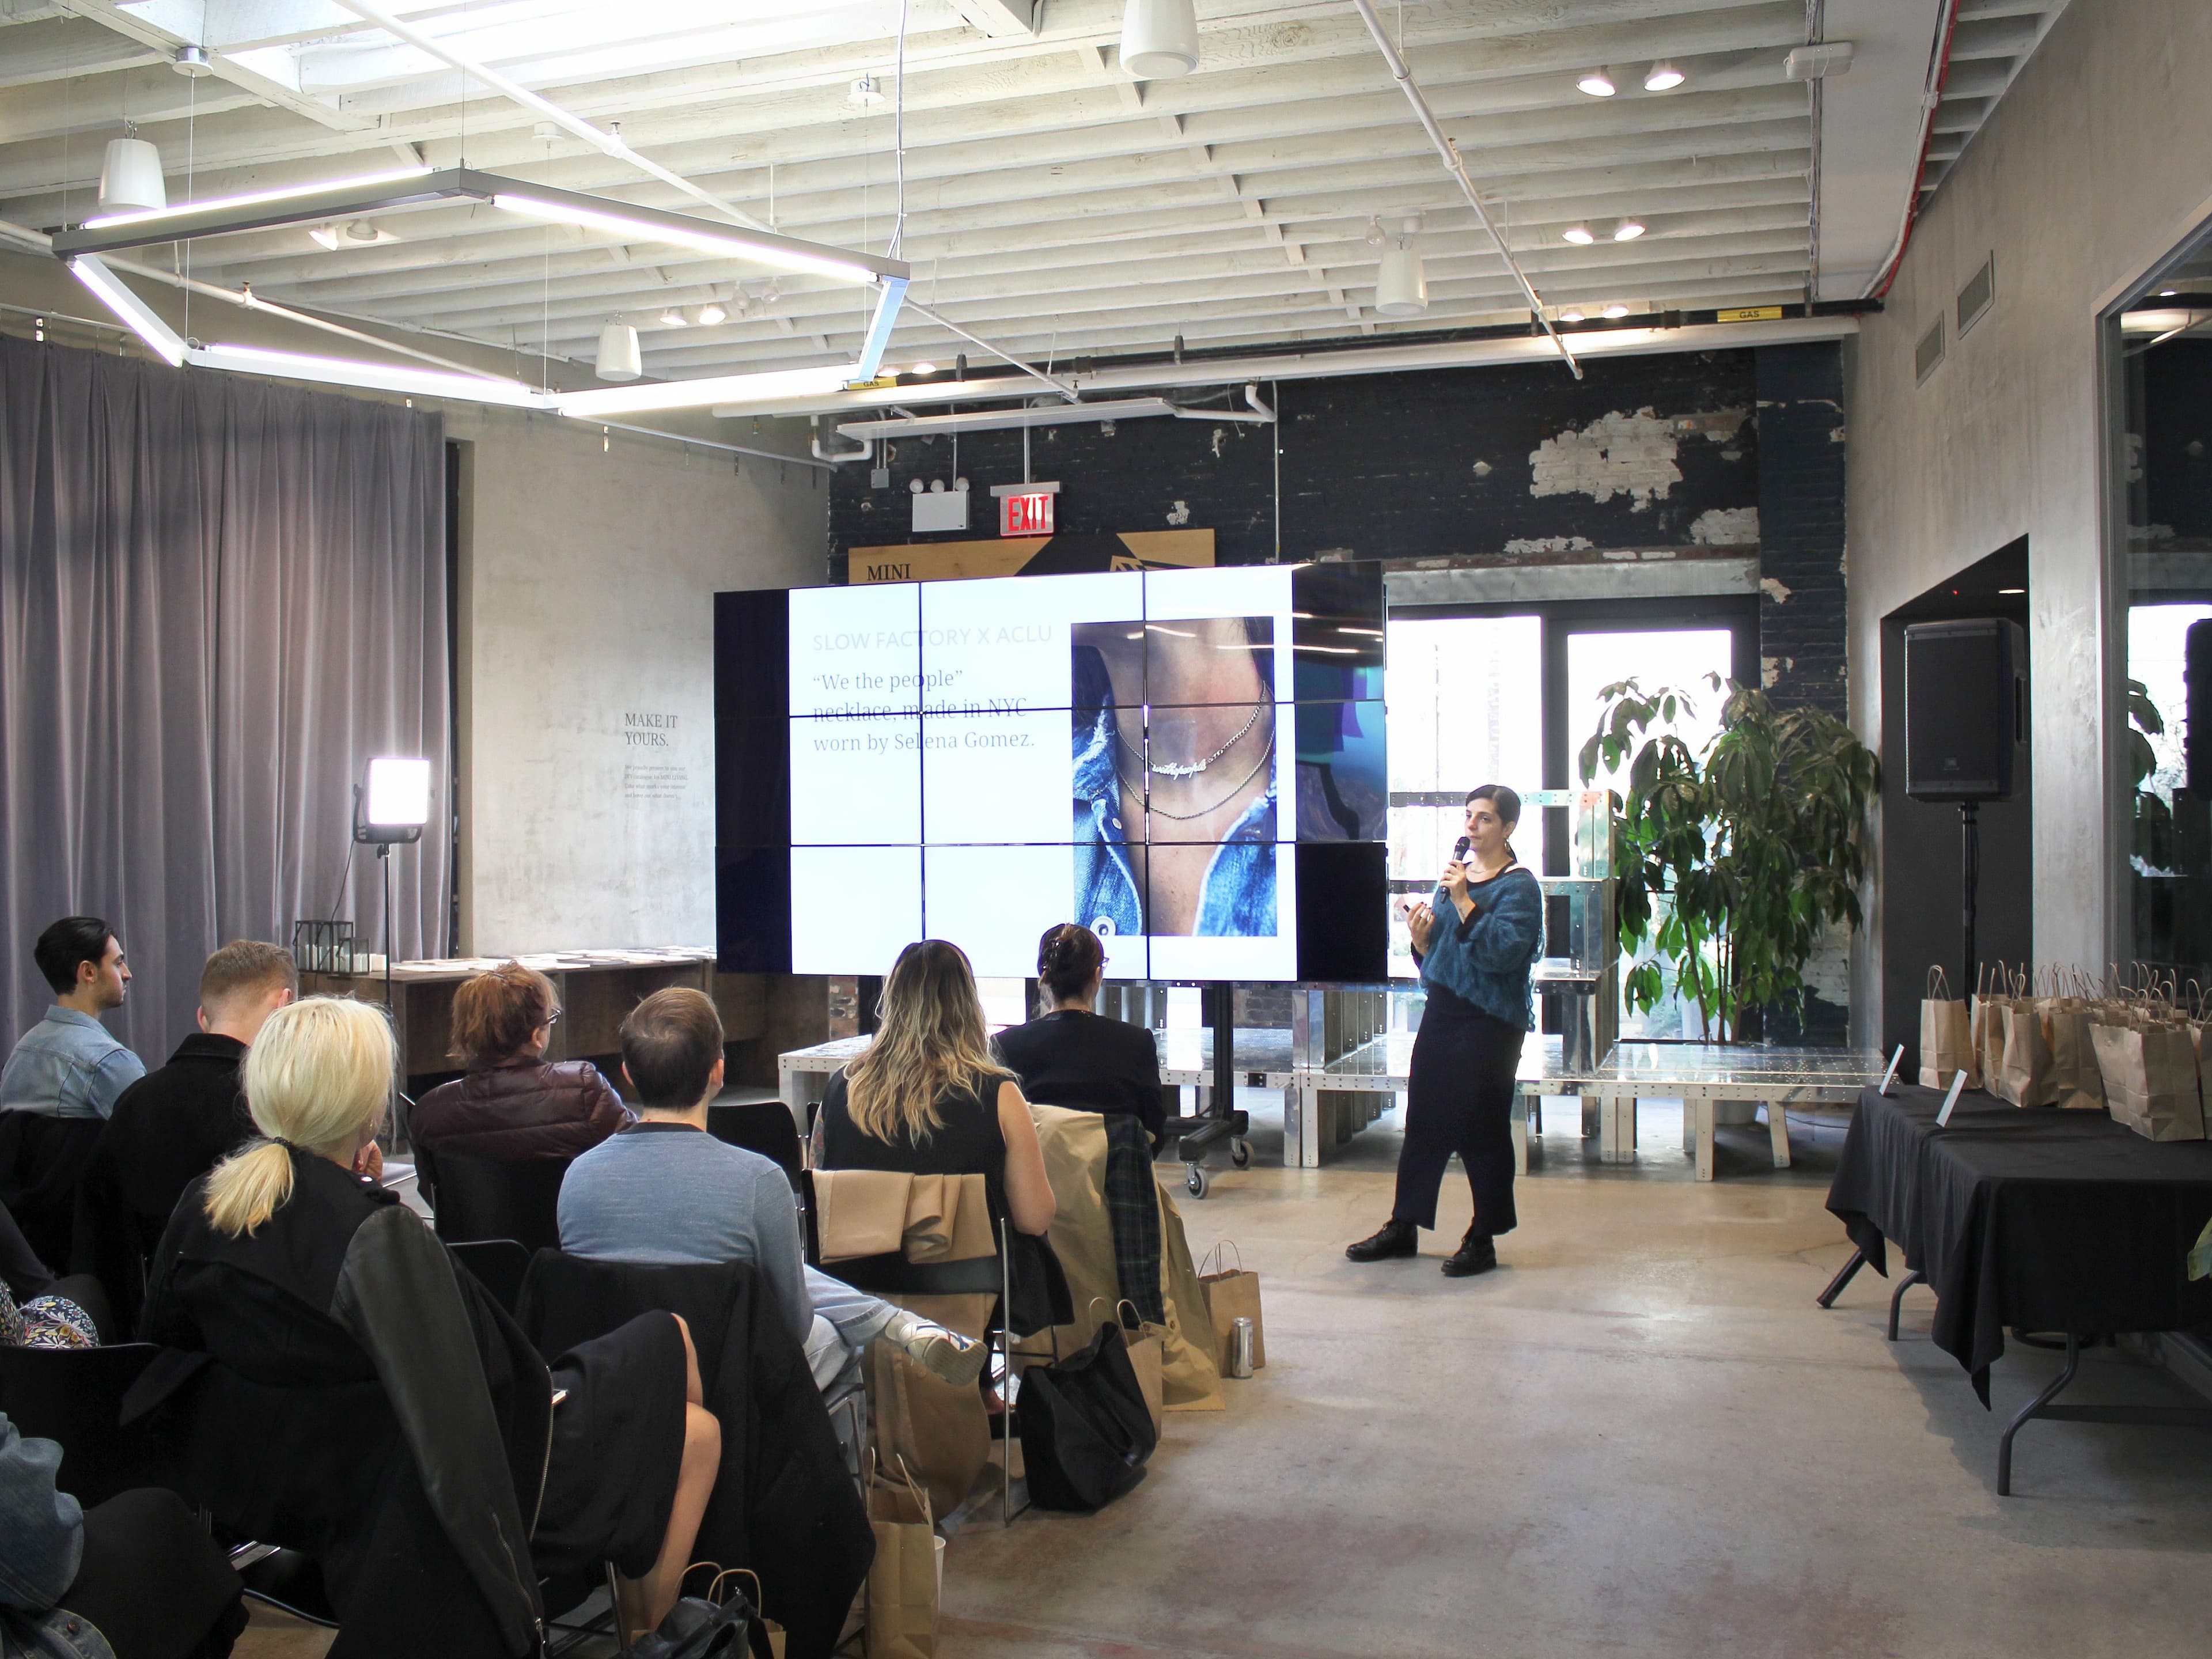 A speaker presents to an audience in a modern, industrial-style room. The audience is seated and facing a large screen displaying a jewelry ad. Tables with gift bags are placed on the right side of the room. The room has large windows, exposed brick, and high ceilings.